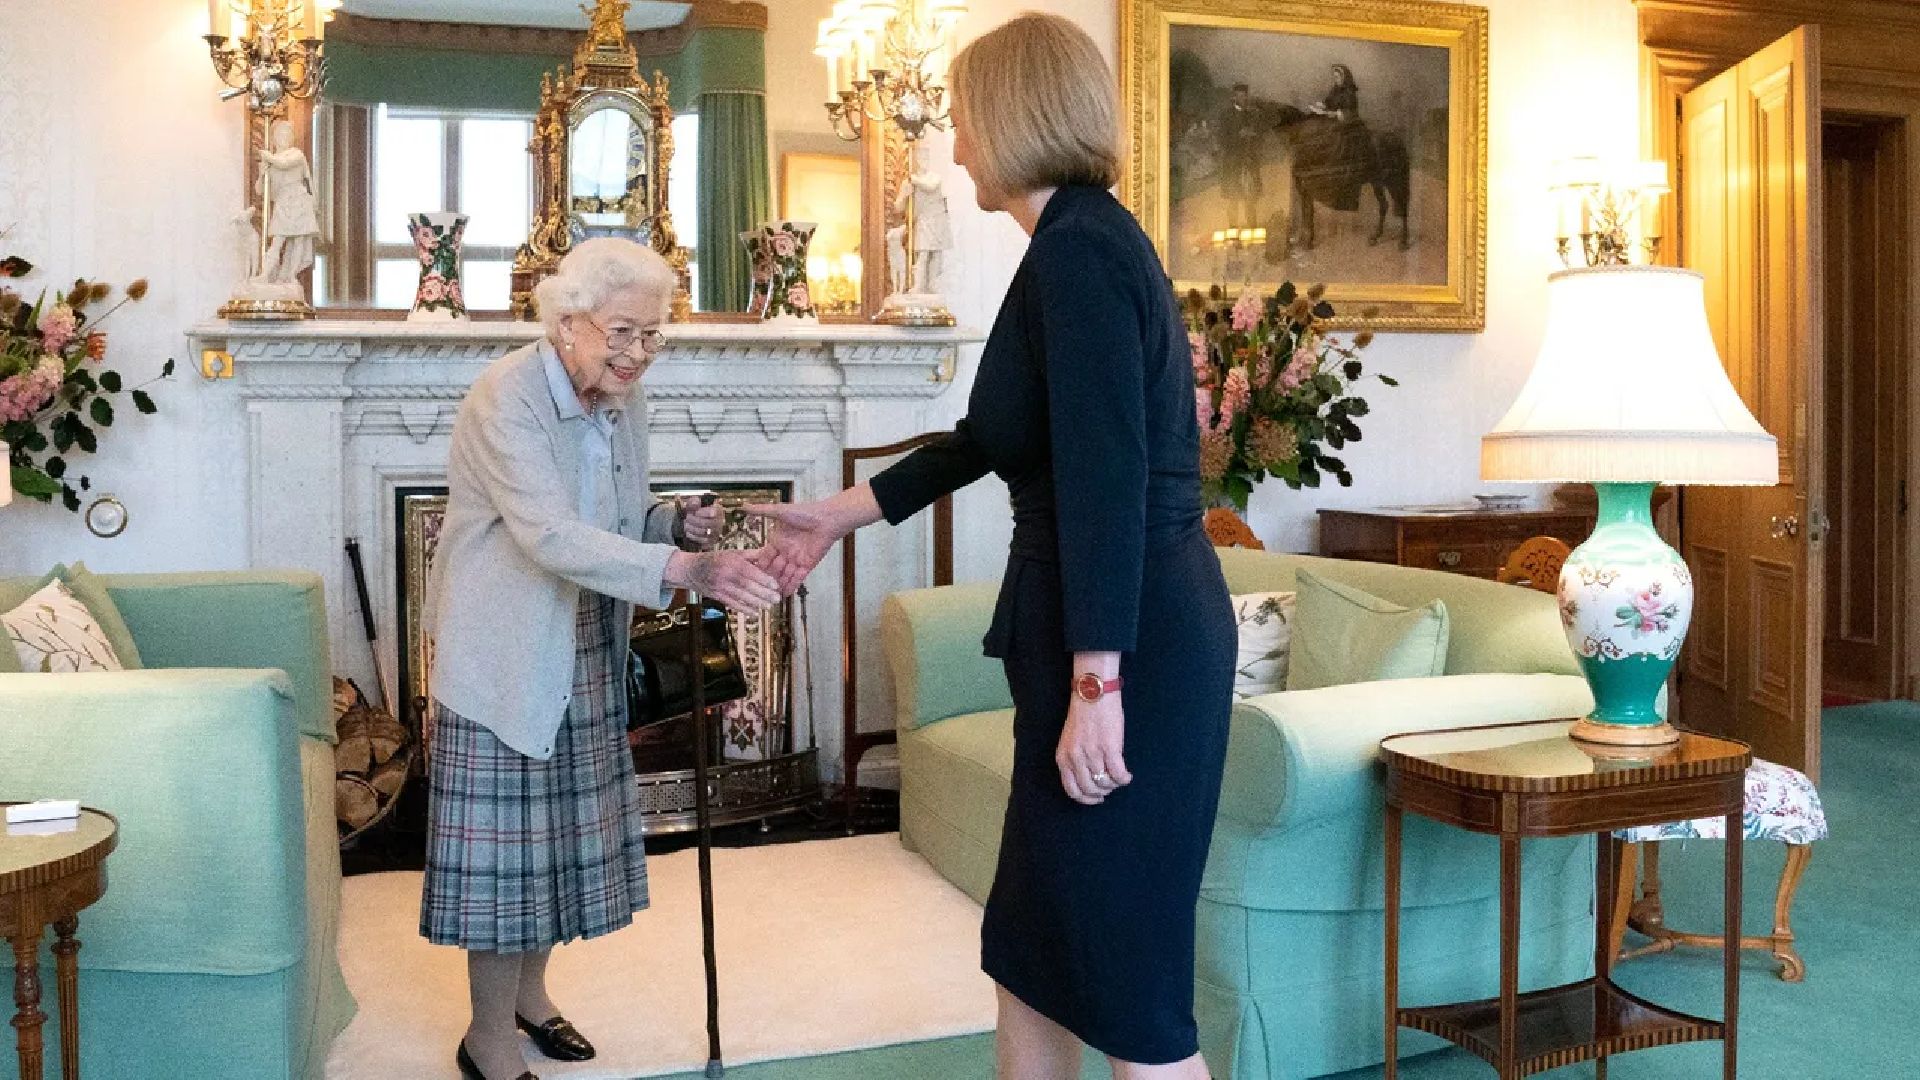 <p>                     Throughout her reign Her Majesty has been served by 15 Prime Ministers including Winston Churchill and in September 2022 she received Liz Truss at her Aberdeenshire home. Photographed during this important moment, Queen Elizabeth formally invited her to form a new Administration and upon her acceptance, Liz Truss officially became the new Prime Minister. This was the monarch’s last public official duty before she passed away on 8th September 2022 and a moment in Queen Elizabeth's life that showcased her unwavering devotion to her royal duties.                   </p>